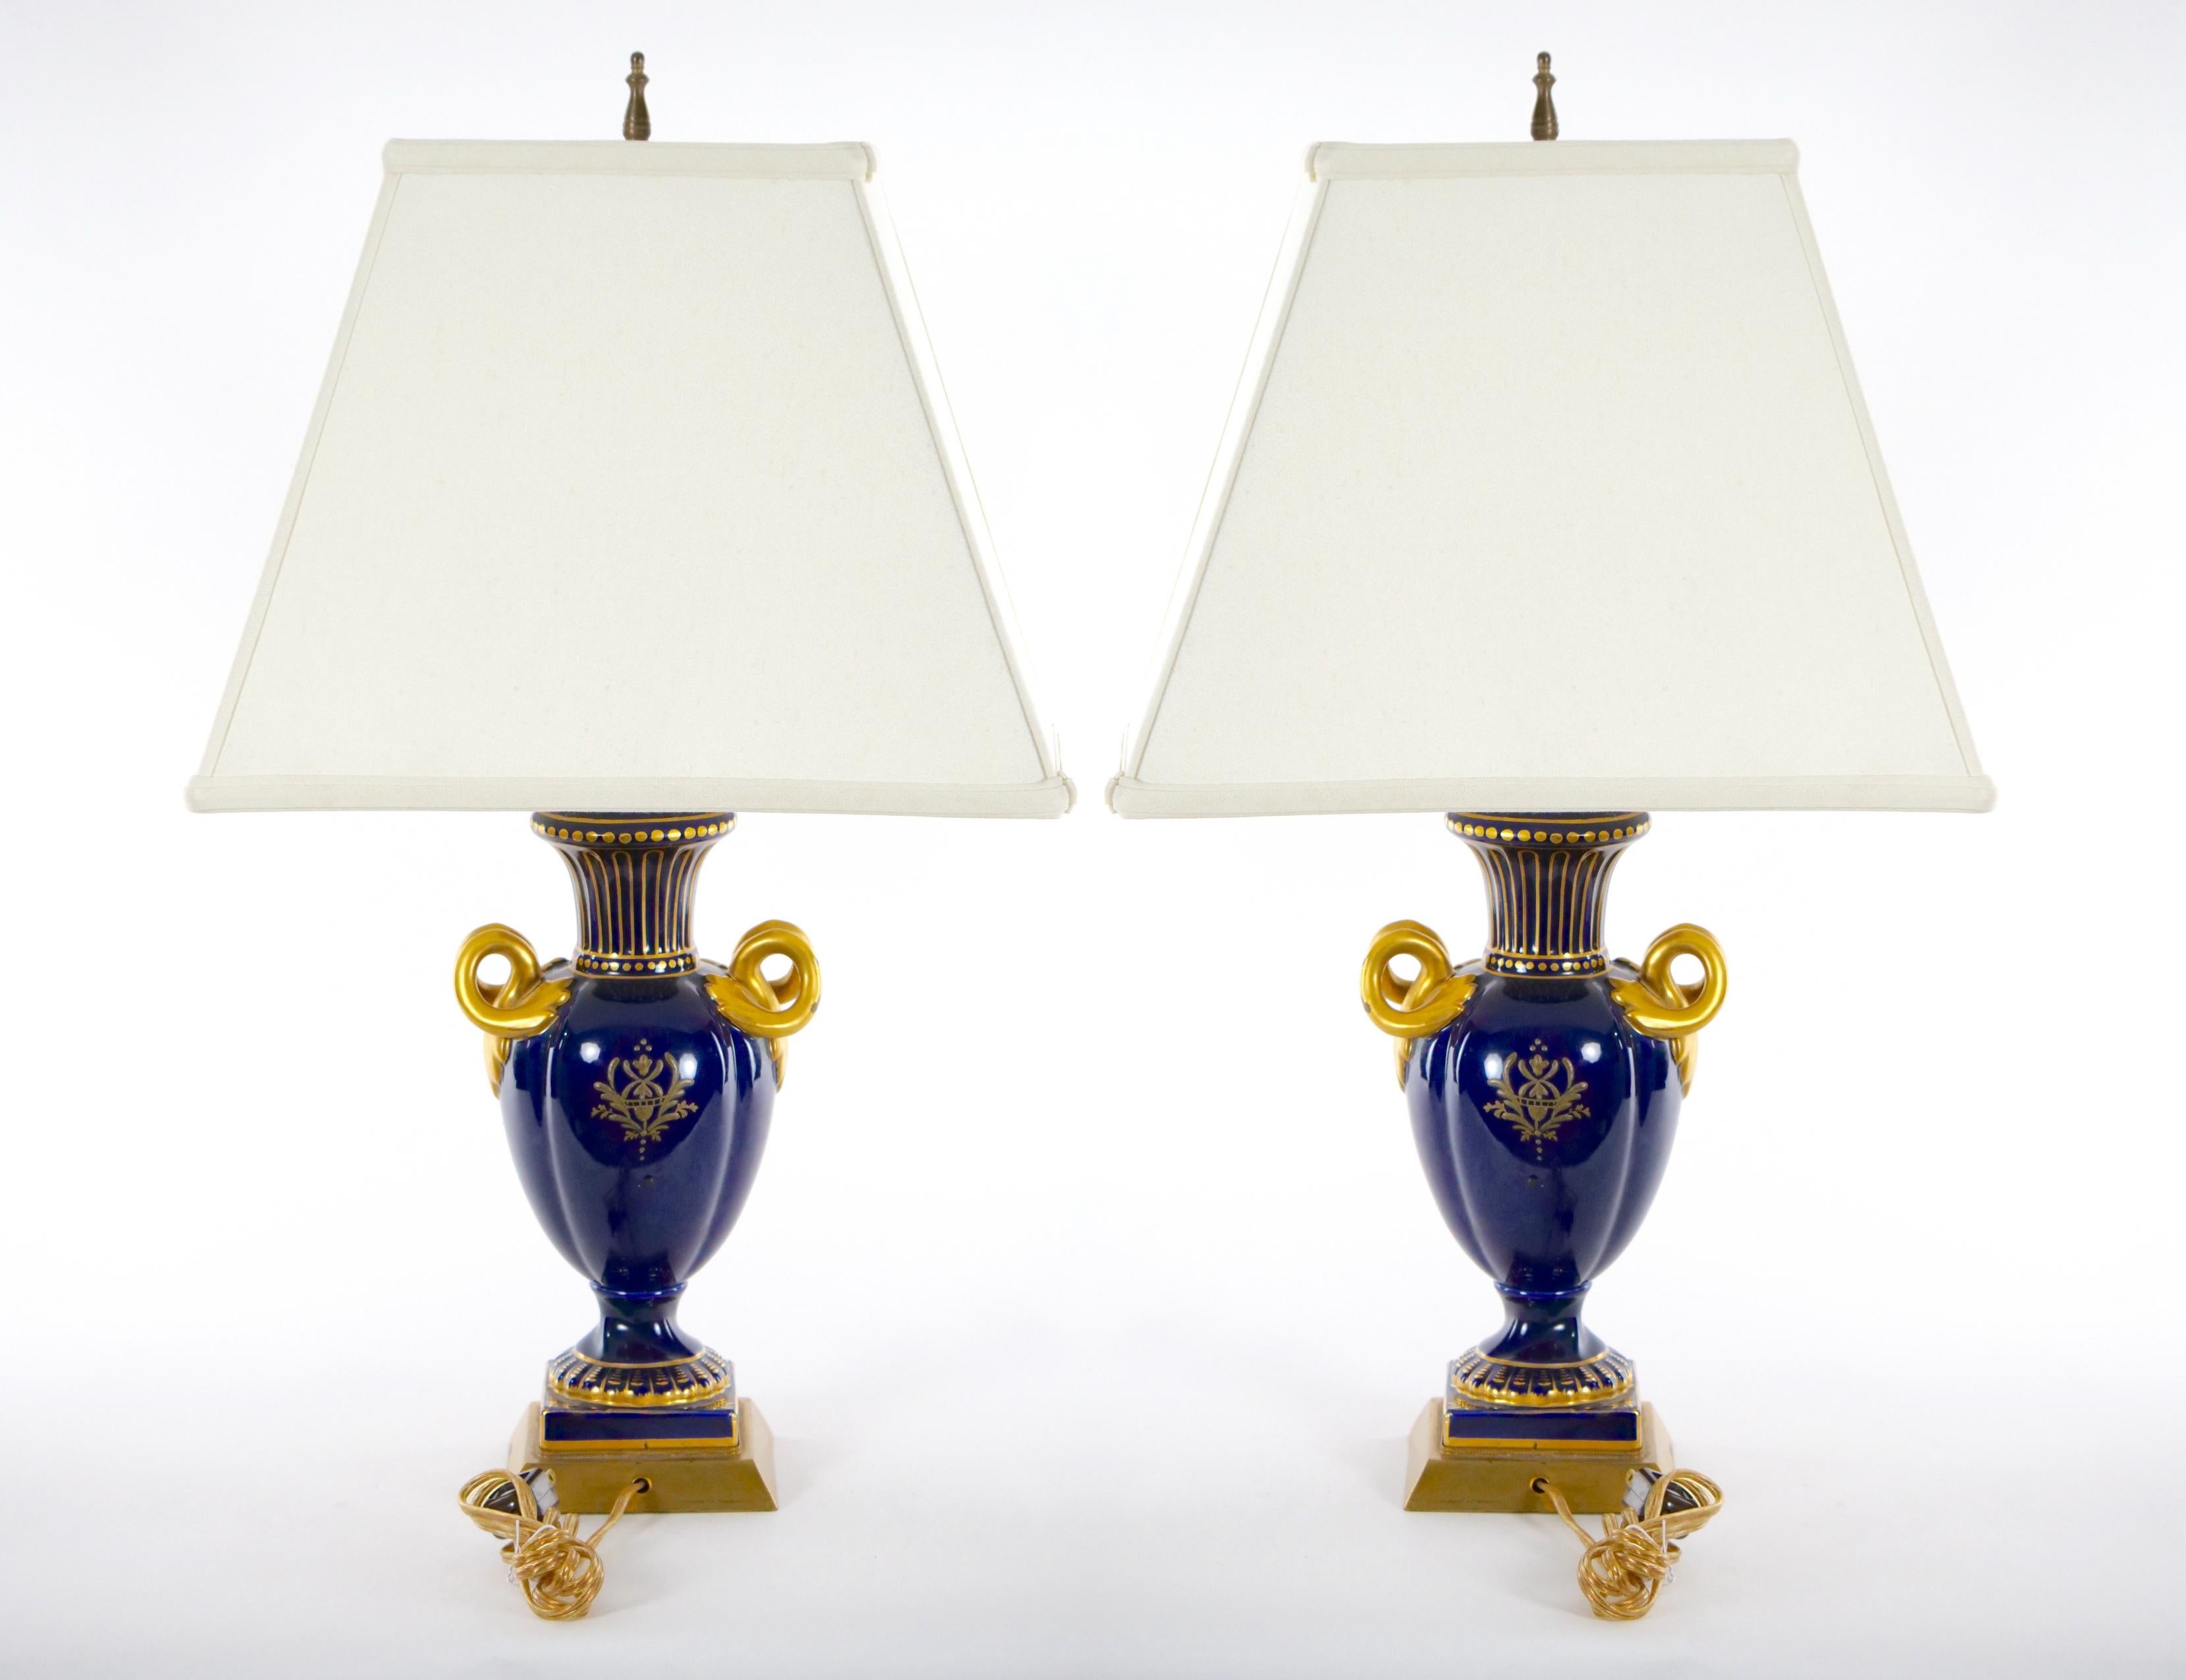 Early 20th century Louis XVI style French porcelain and hand gilt gold decorated urn shape vase pair table lamp. Each lamp features on one side a painted pastoral scenes decorated design. The reverse is a gilt gold painted with what appears to be a